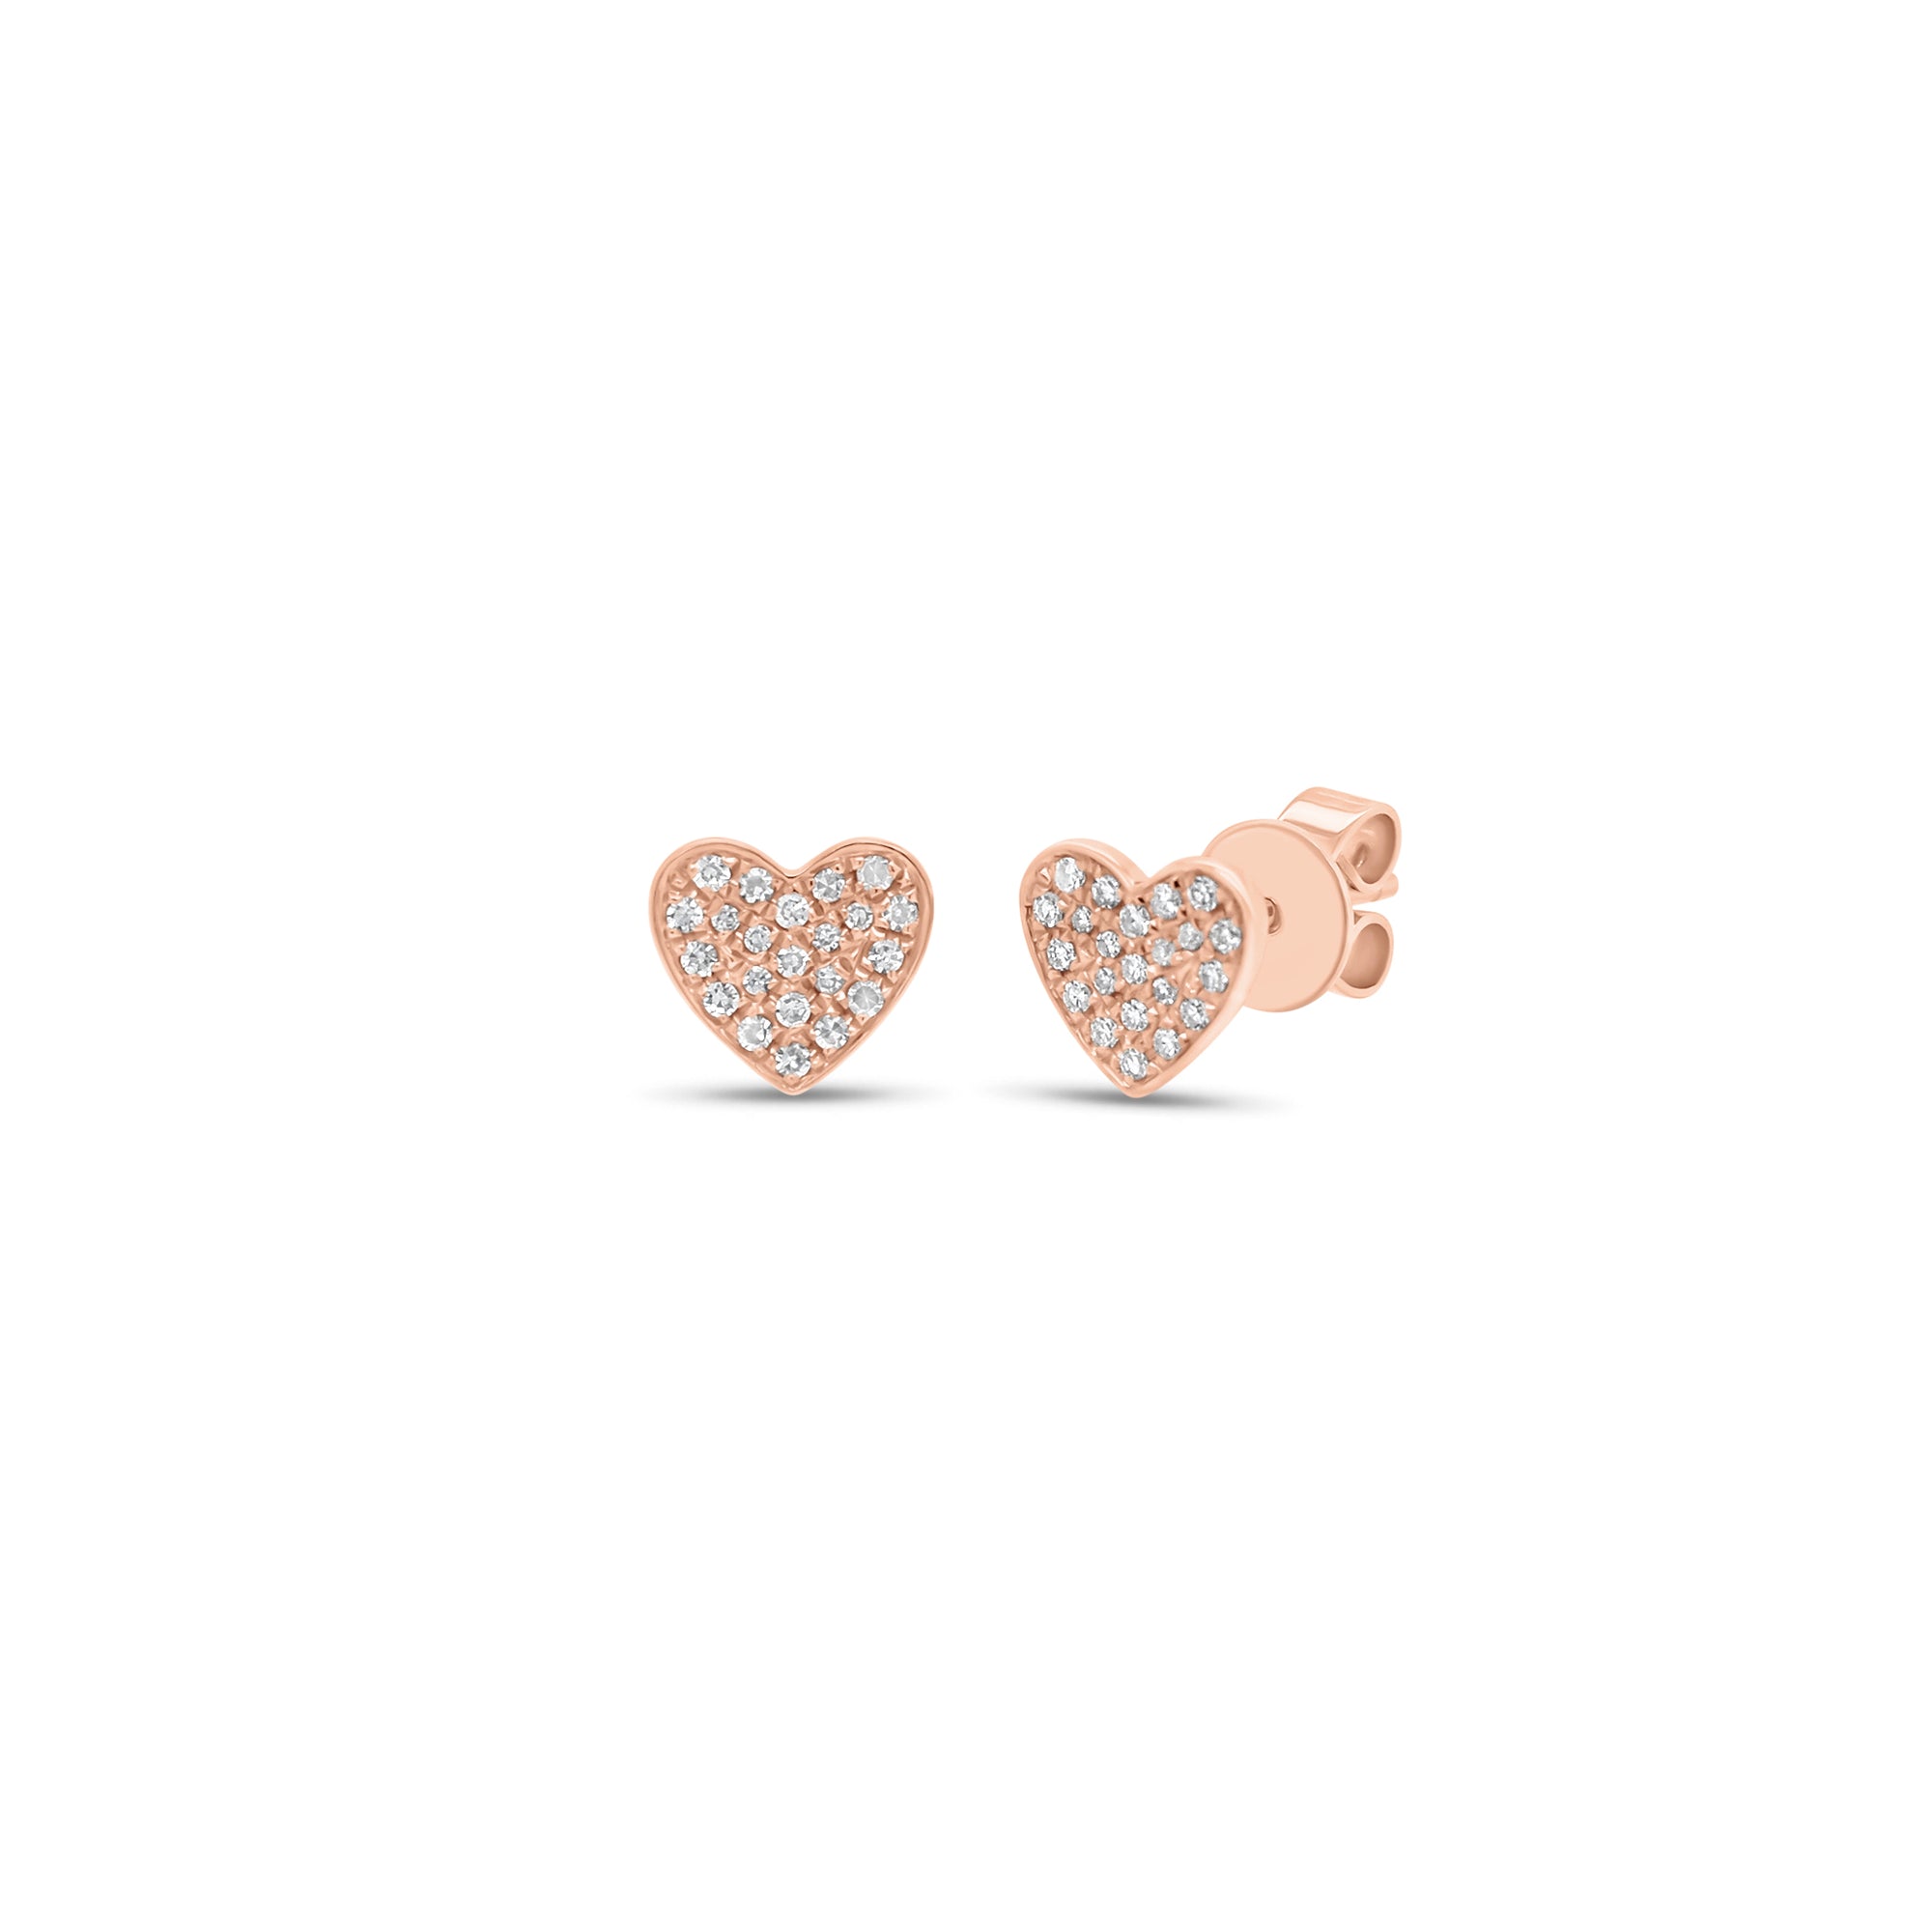 Pave Diamond Chubby Heart Stud Earrings - 14K gold weighing 1.13 grams  - 44 round diamonds weighing 0.12 carats